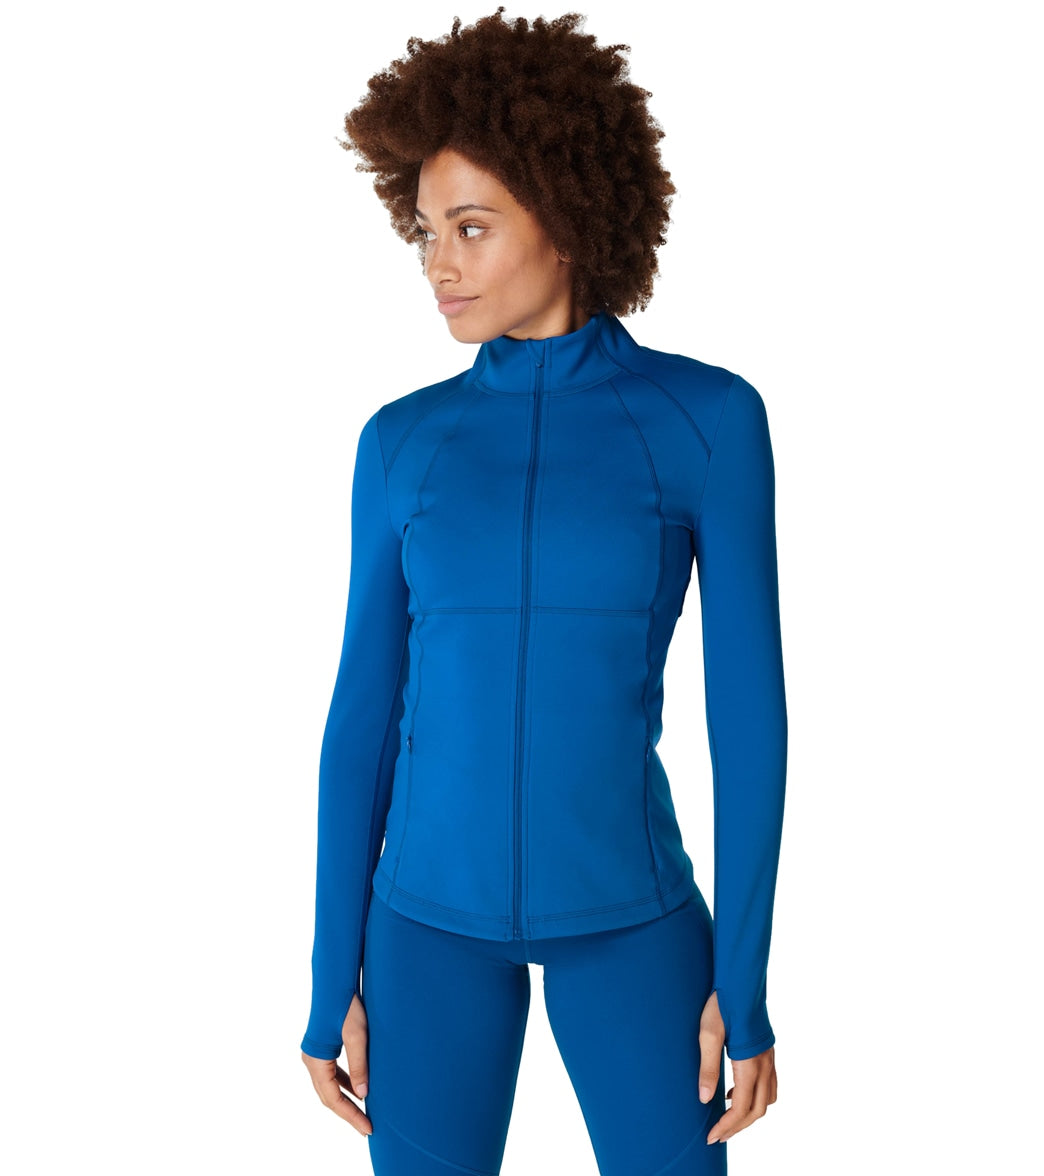 Sweaty Betty Power Boost Workout Zip Up at YogaOutlet.com - Free